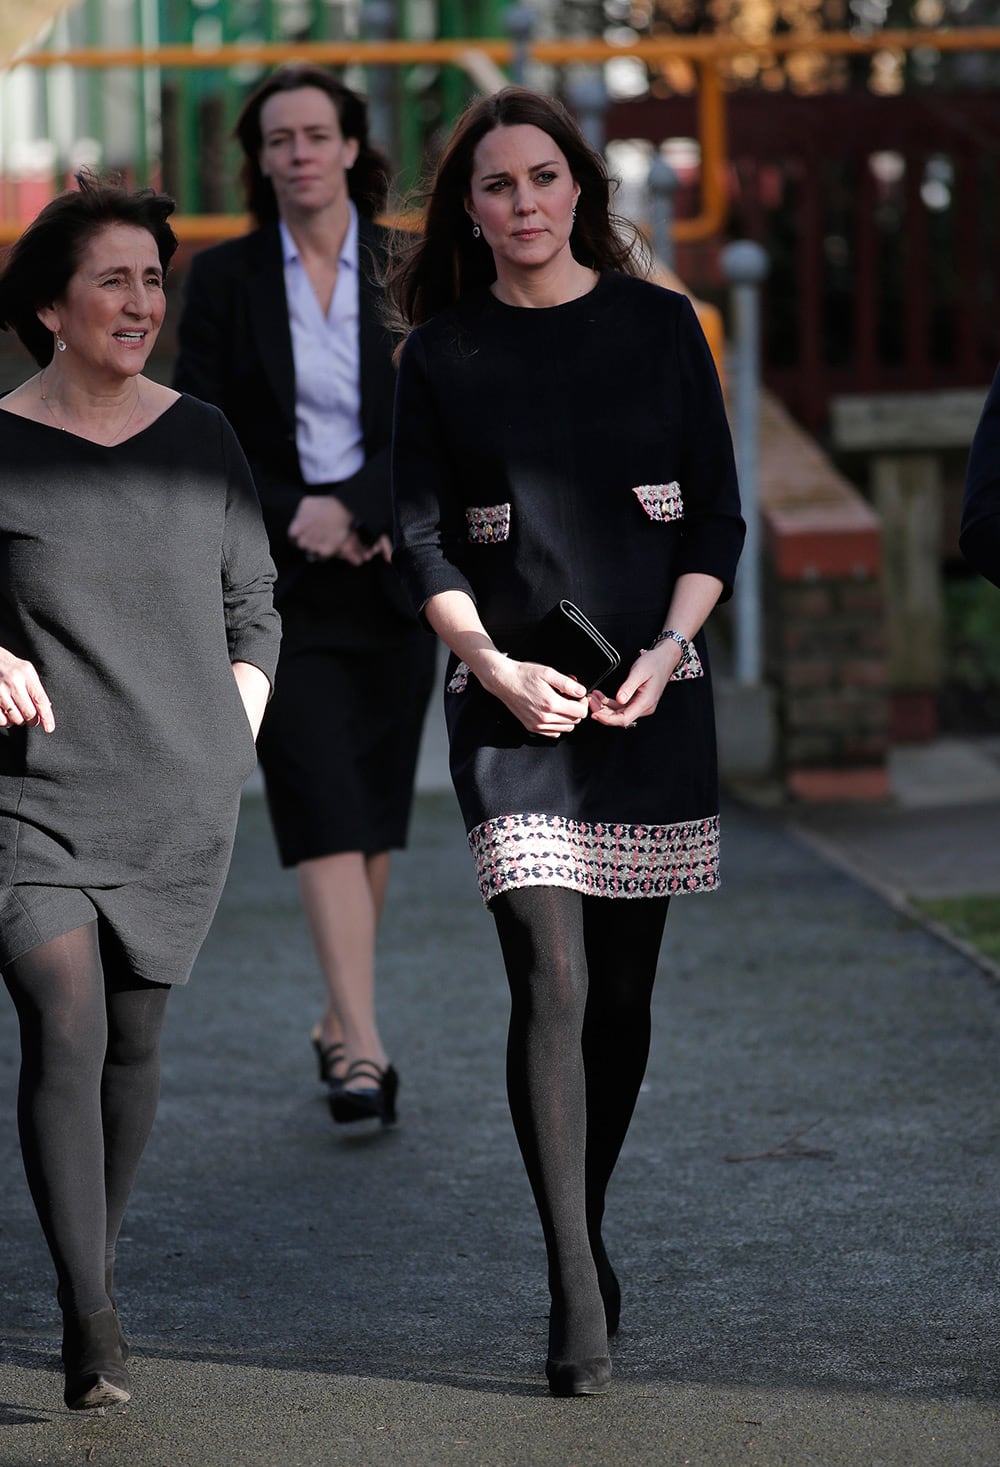 Britain's Kate, Duchess of Cambridge, arrives at a primary school in London.